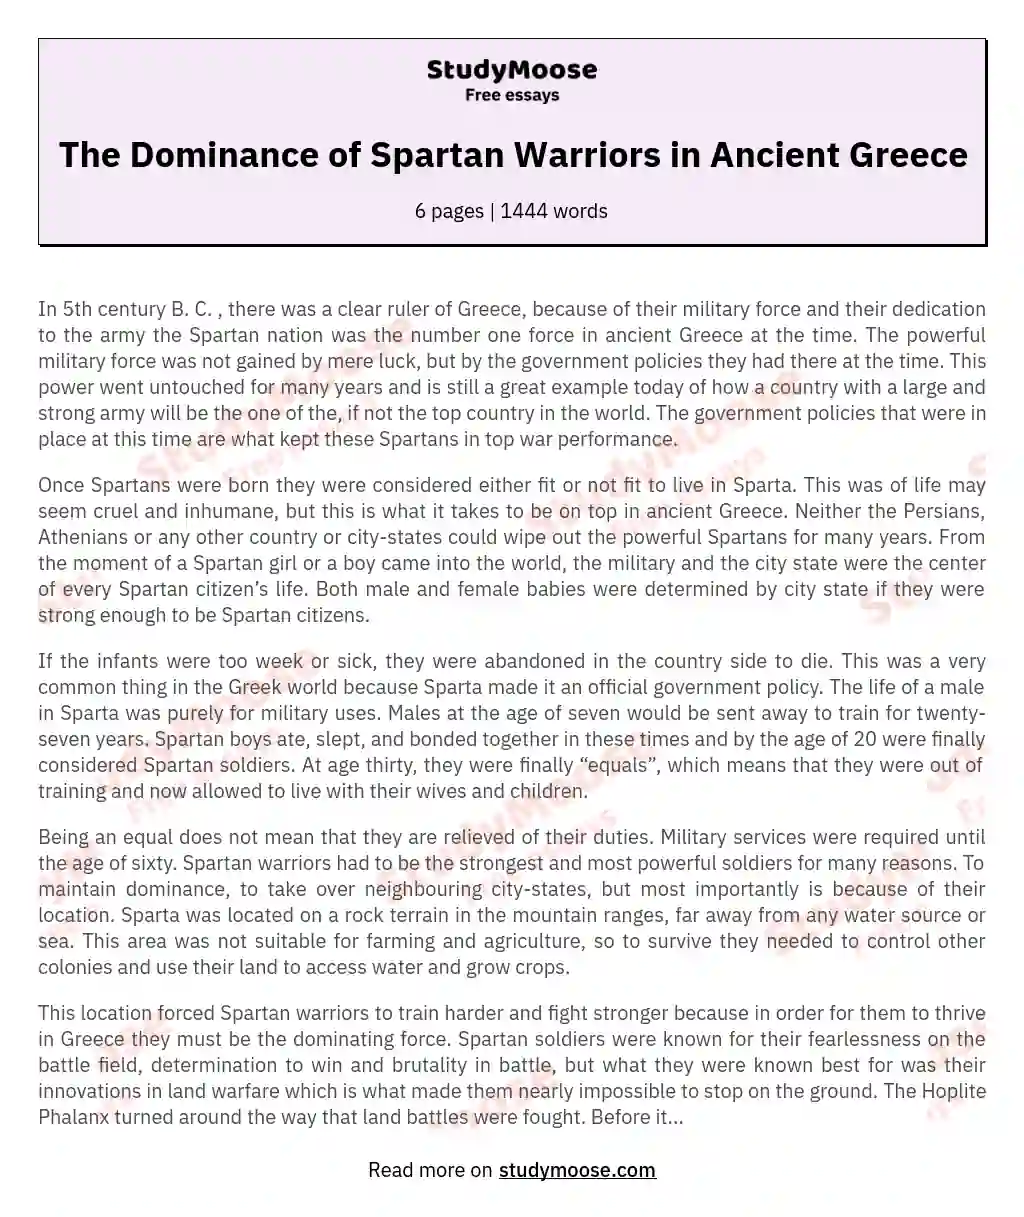 Spartan Military Dominance in Ancient Greece essay